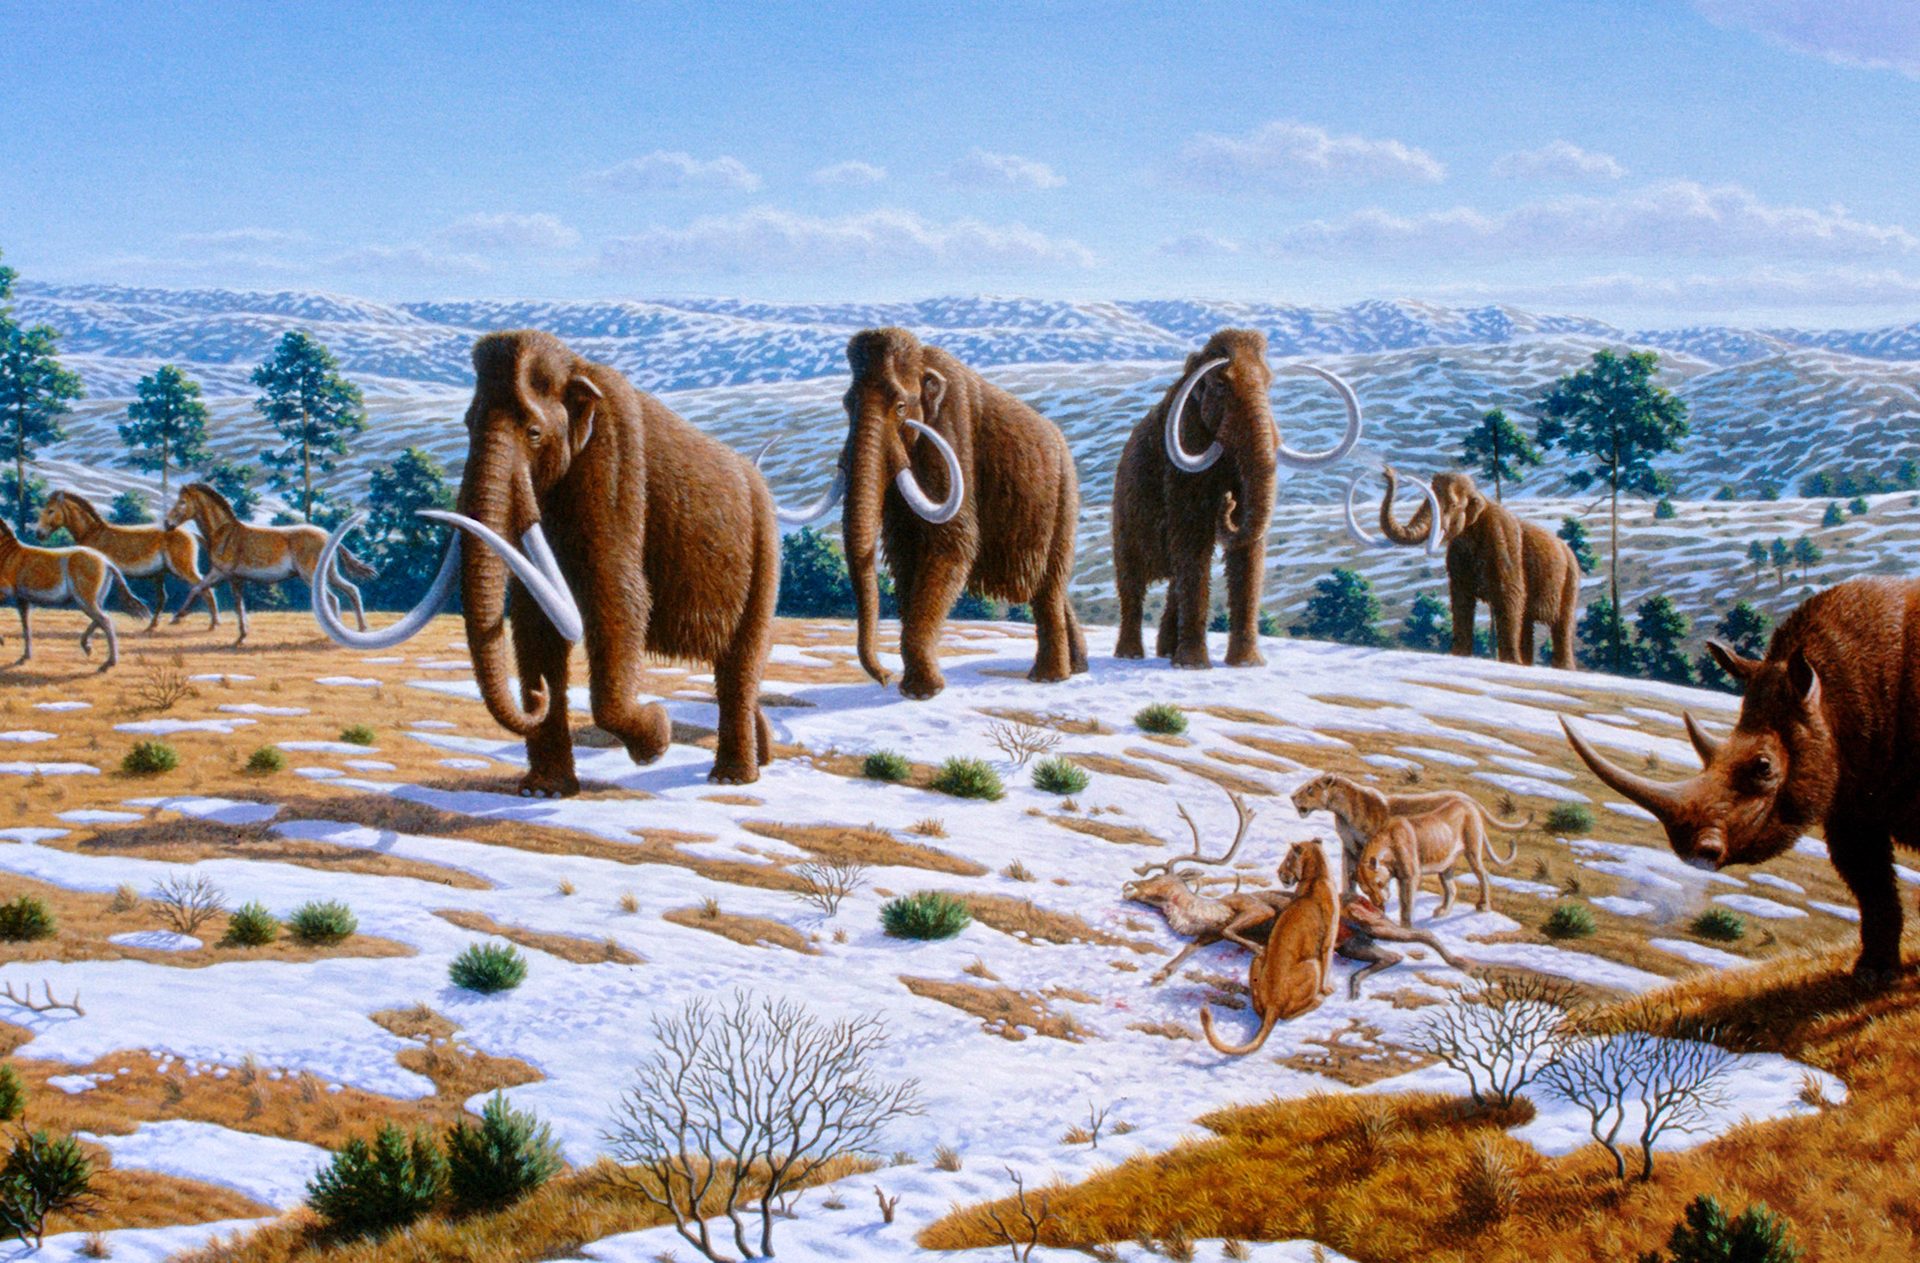 The Middle to Late Pleistocene epoch